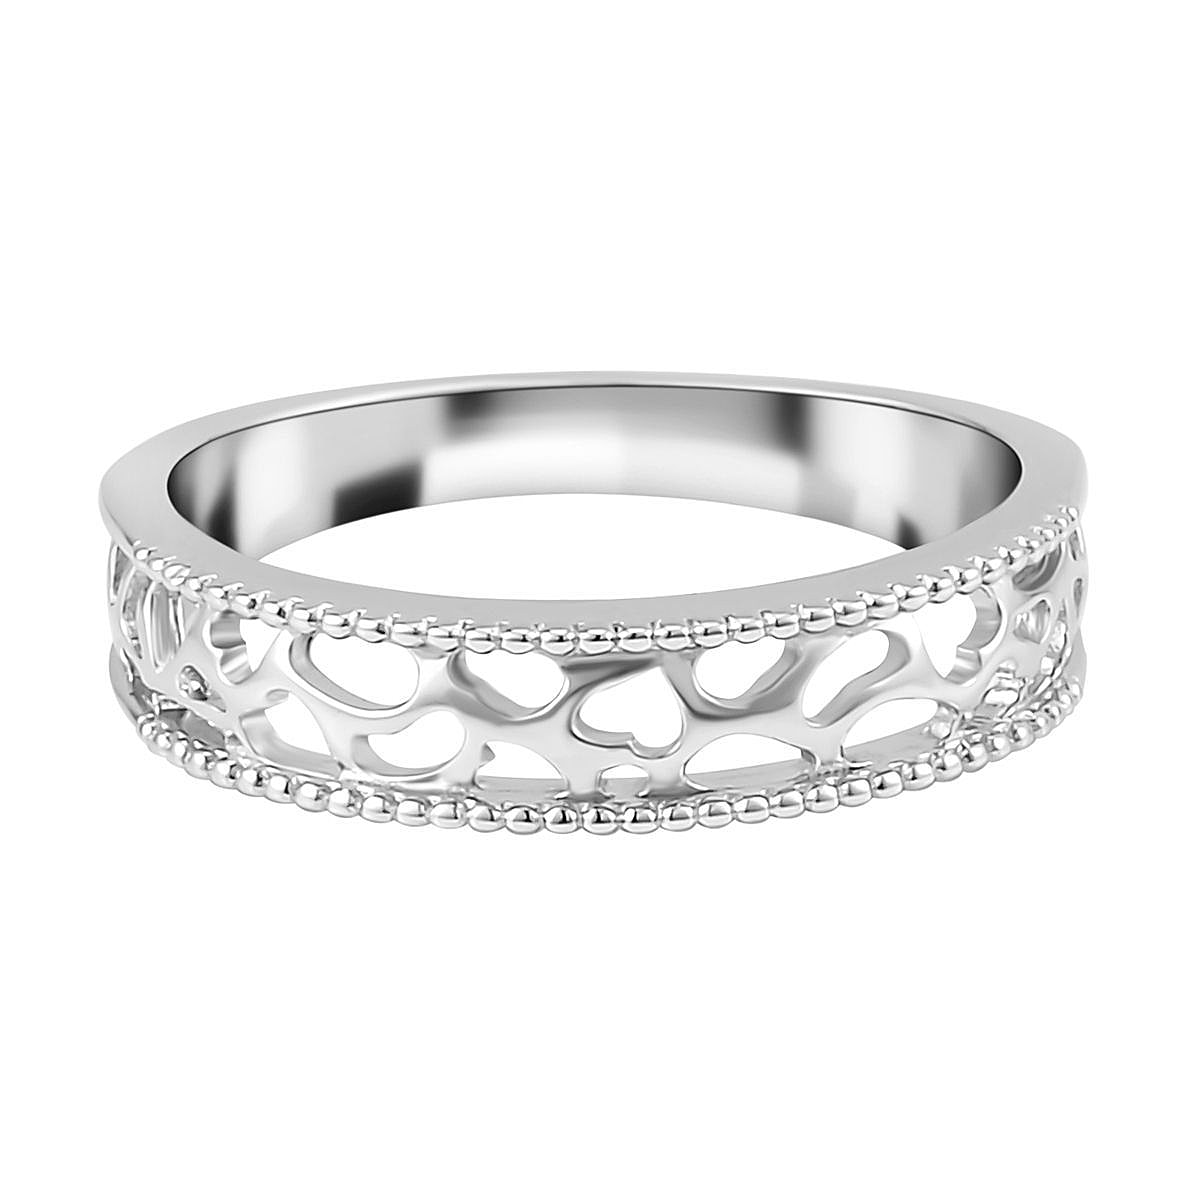 Rachel Galley Love Lattice Collection - Rhodium Overlay Sterling Silver Ring